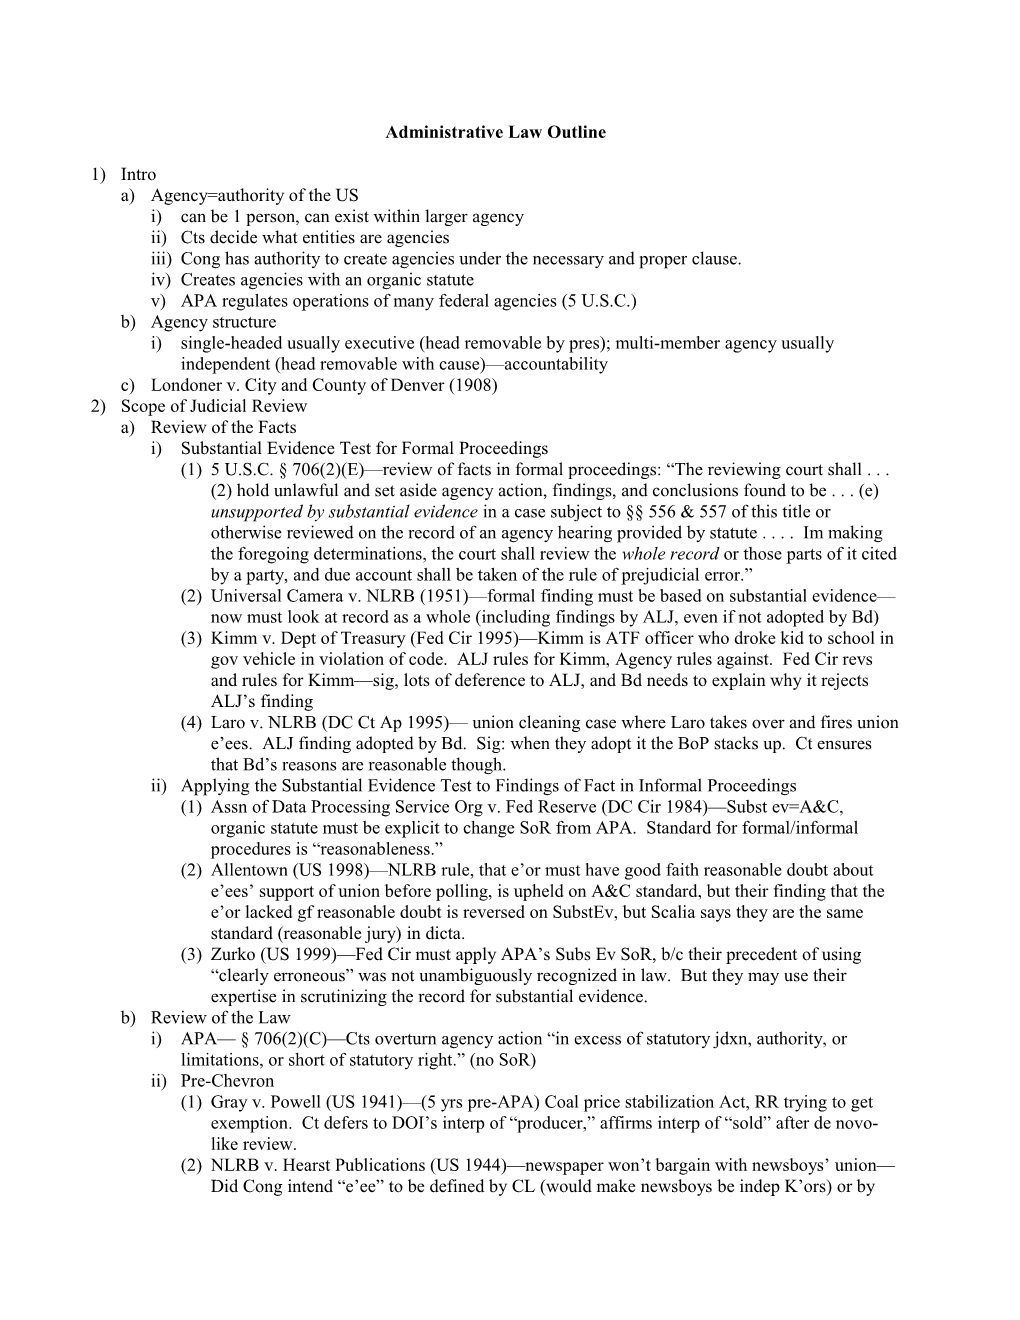 Administrative Law Outline s1